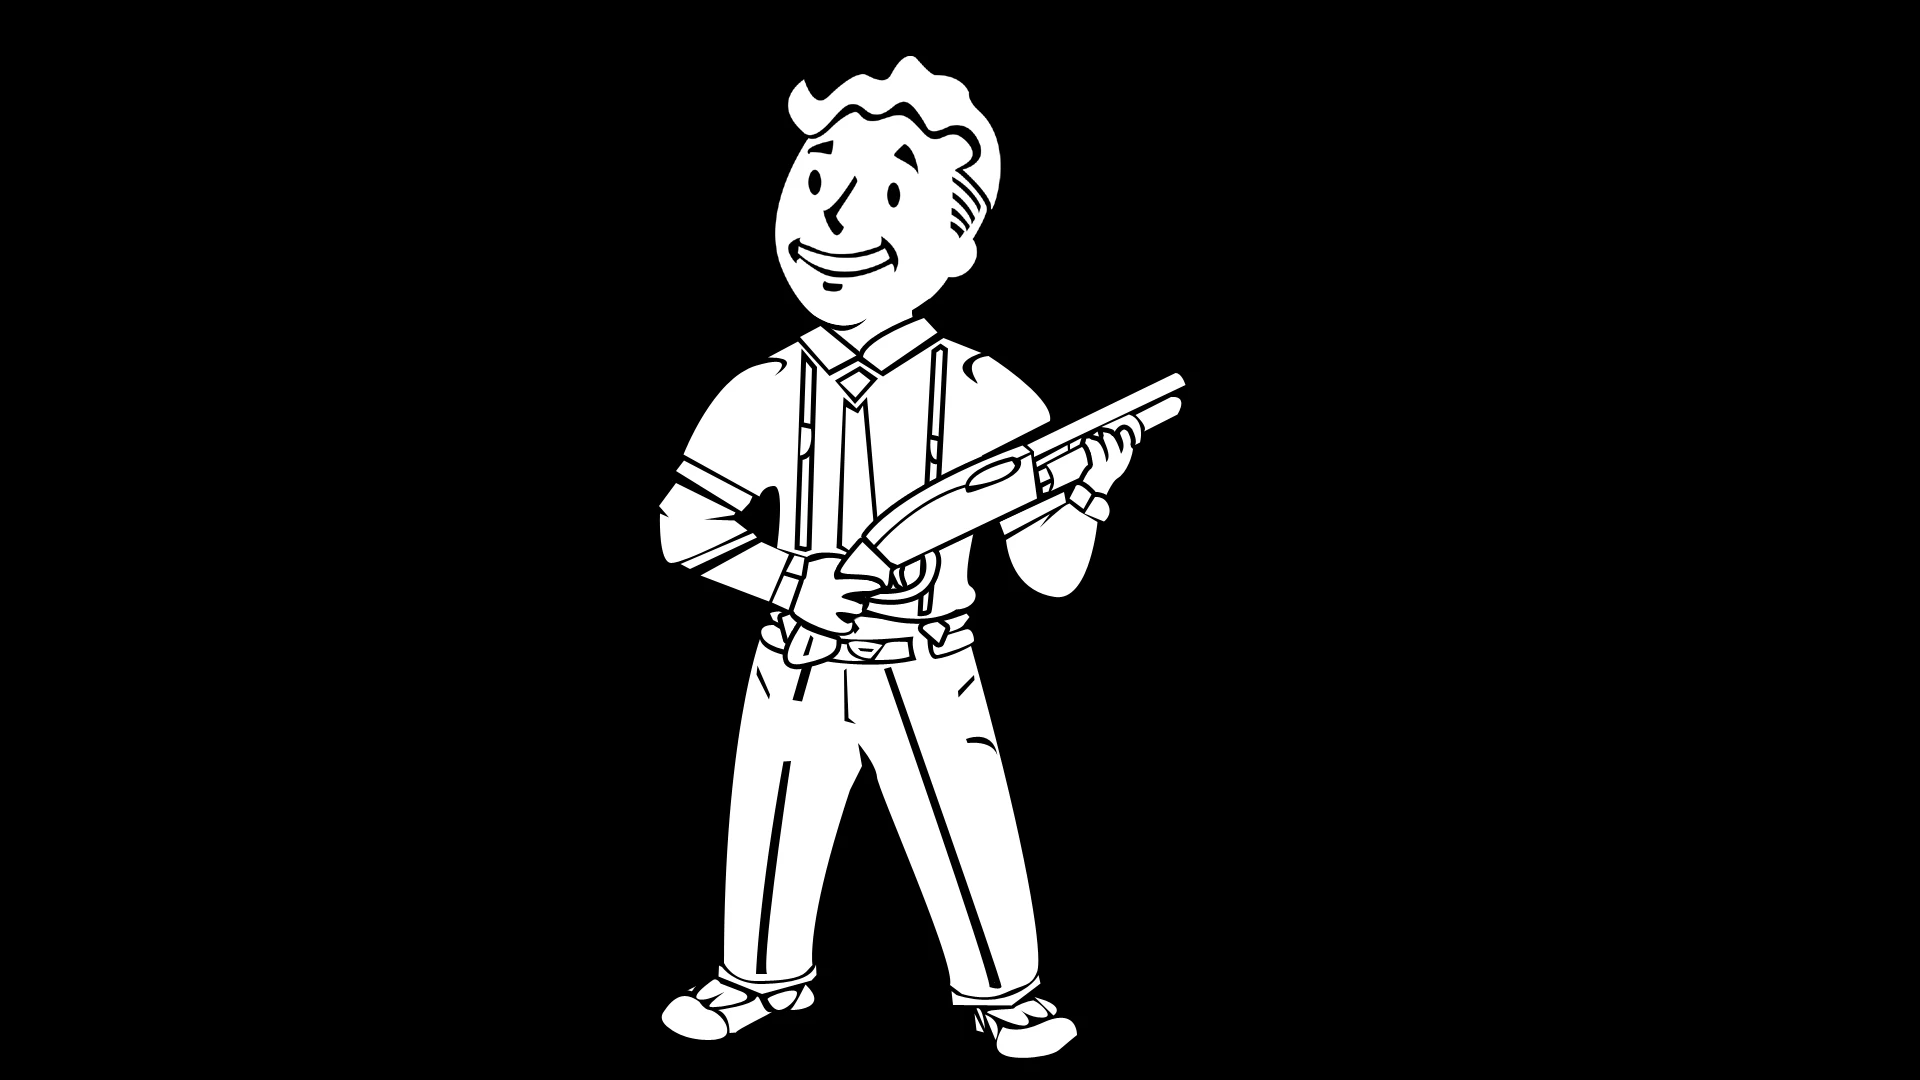 vault boy mobster shotgun icon at fallout new vegas mods and community vault boy mobster shotgun icon at